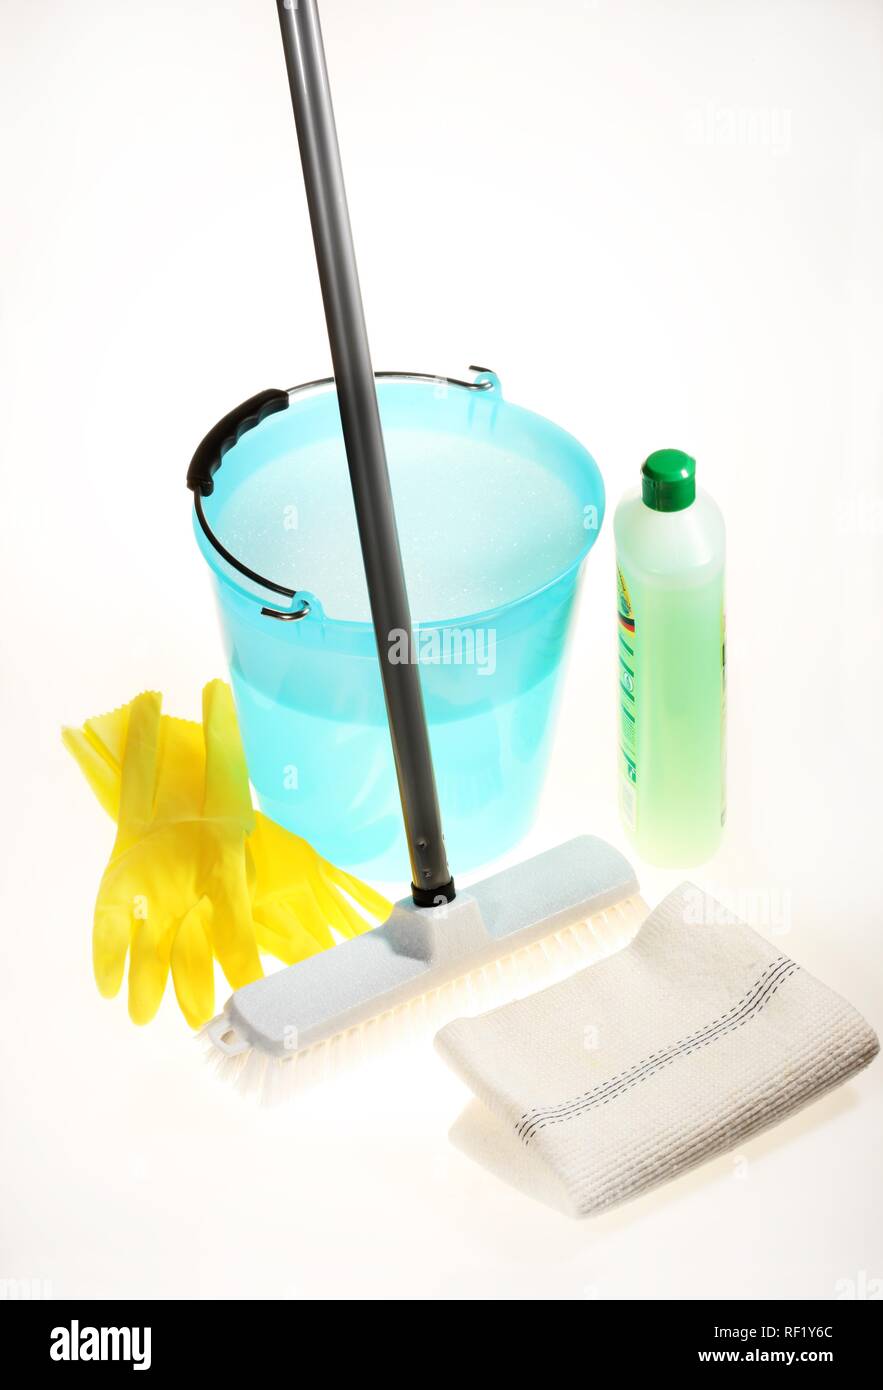 https://c8.alamy.com/comp/RF1Y6C/broom-and-bucket-used-to-scrub-floors-yellow-rubber-gloves-and-cleaning-product-RF1Y6C.jpg